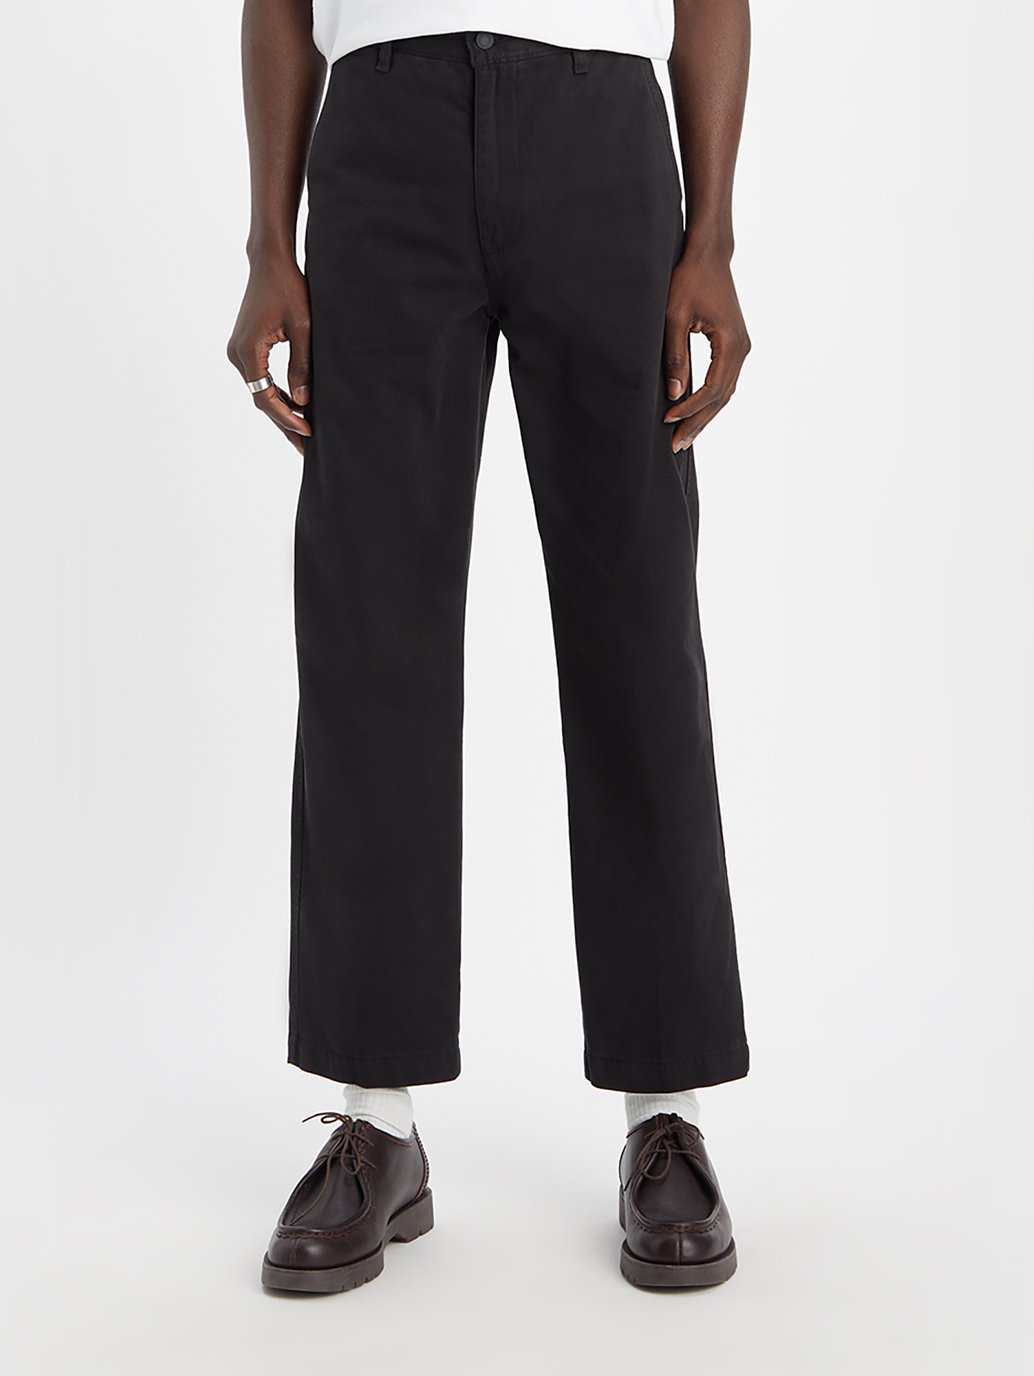 Buy Levi's® Men's XX Stay Loose Chino Pants | Levi's Official Online